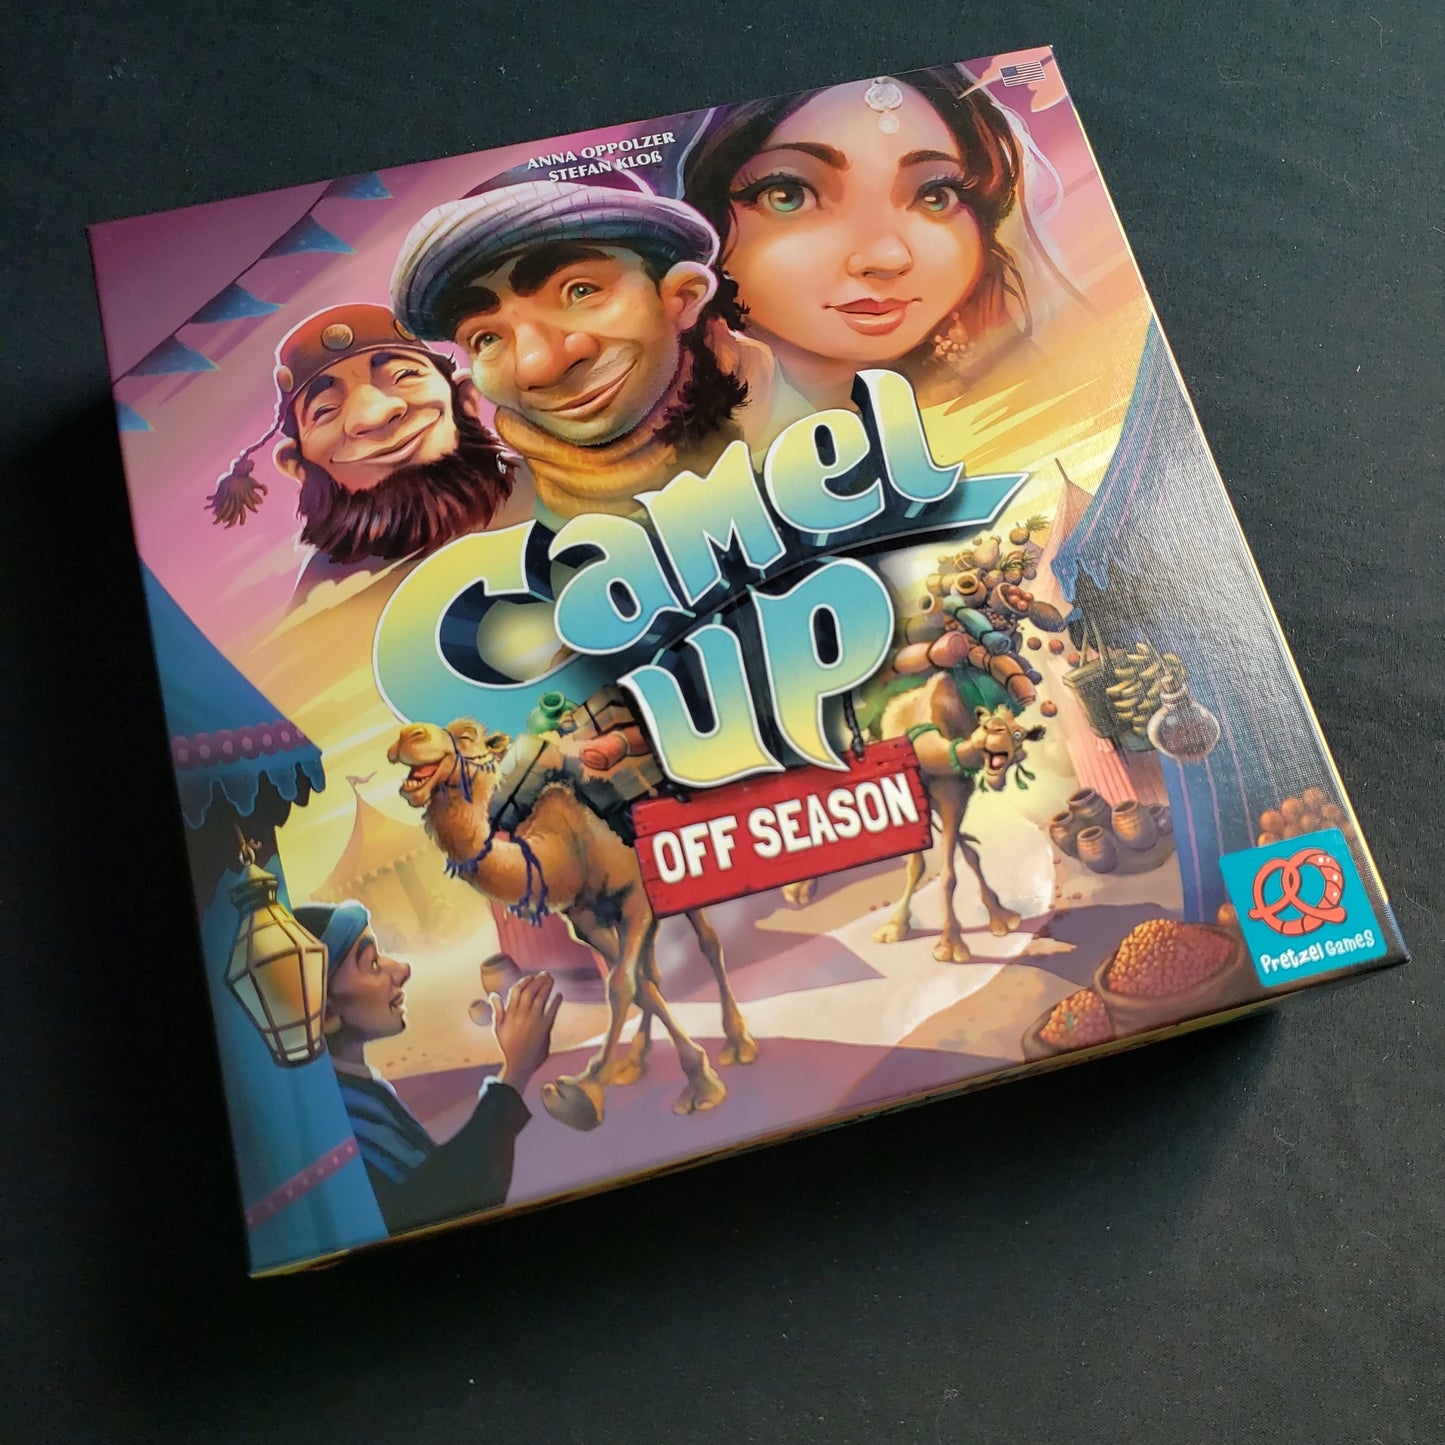 Image shows the front cover of the box of the Camel Up: Off Season board game